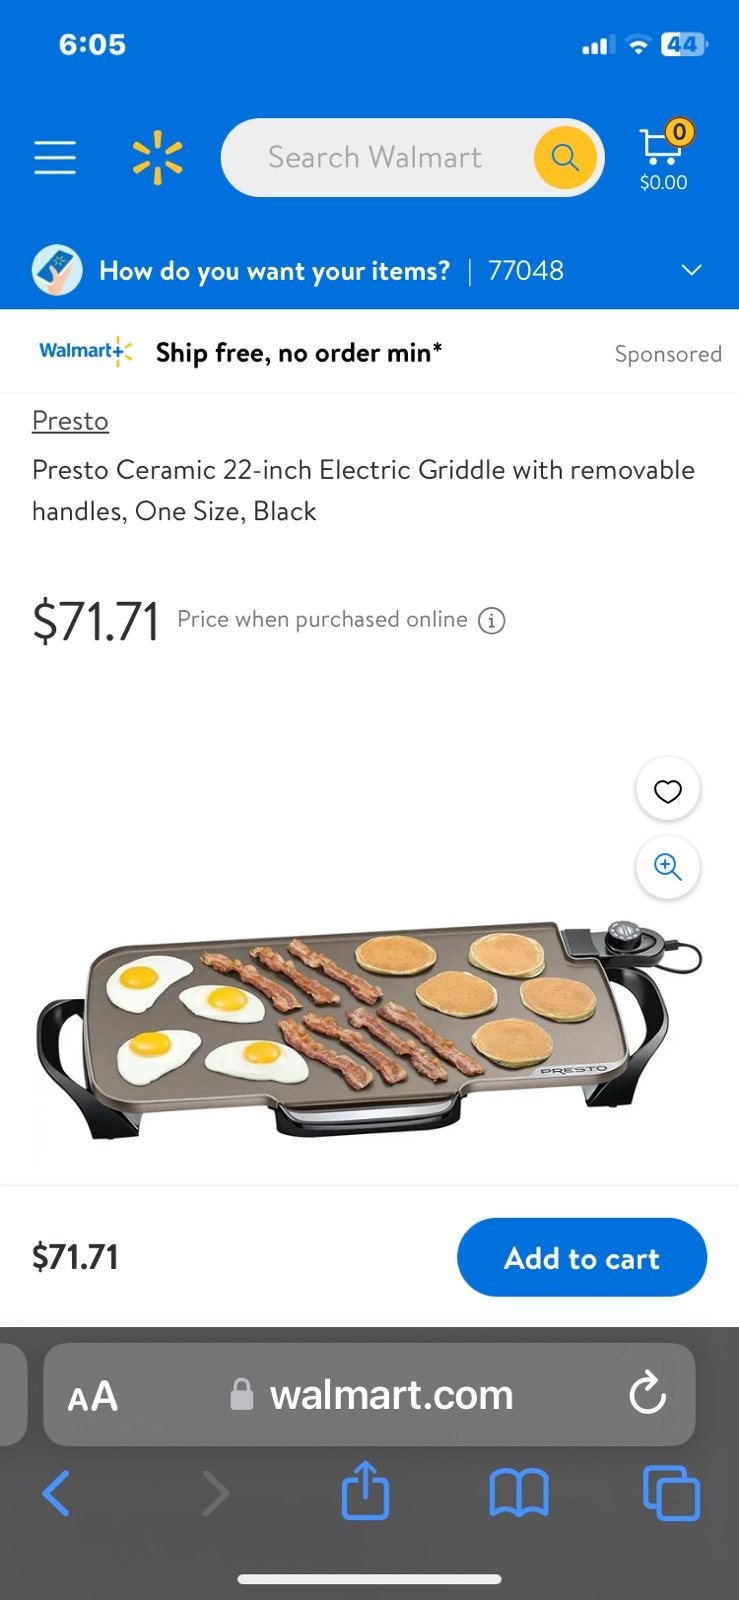 Presto 22” Electric Griddle with Removeable Handles DgTbvuY7c